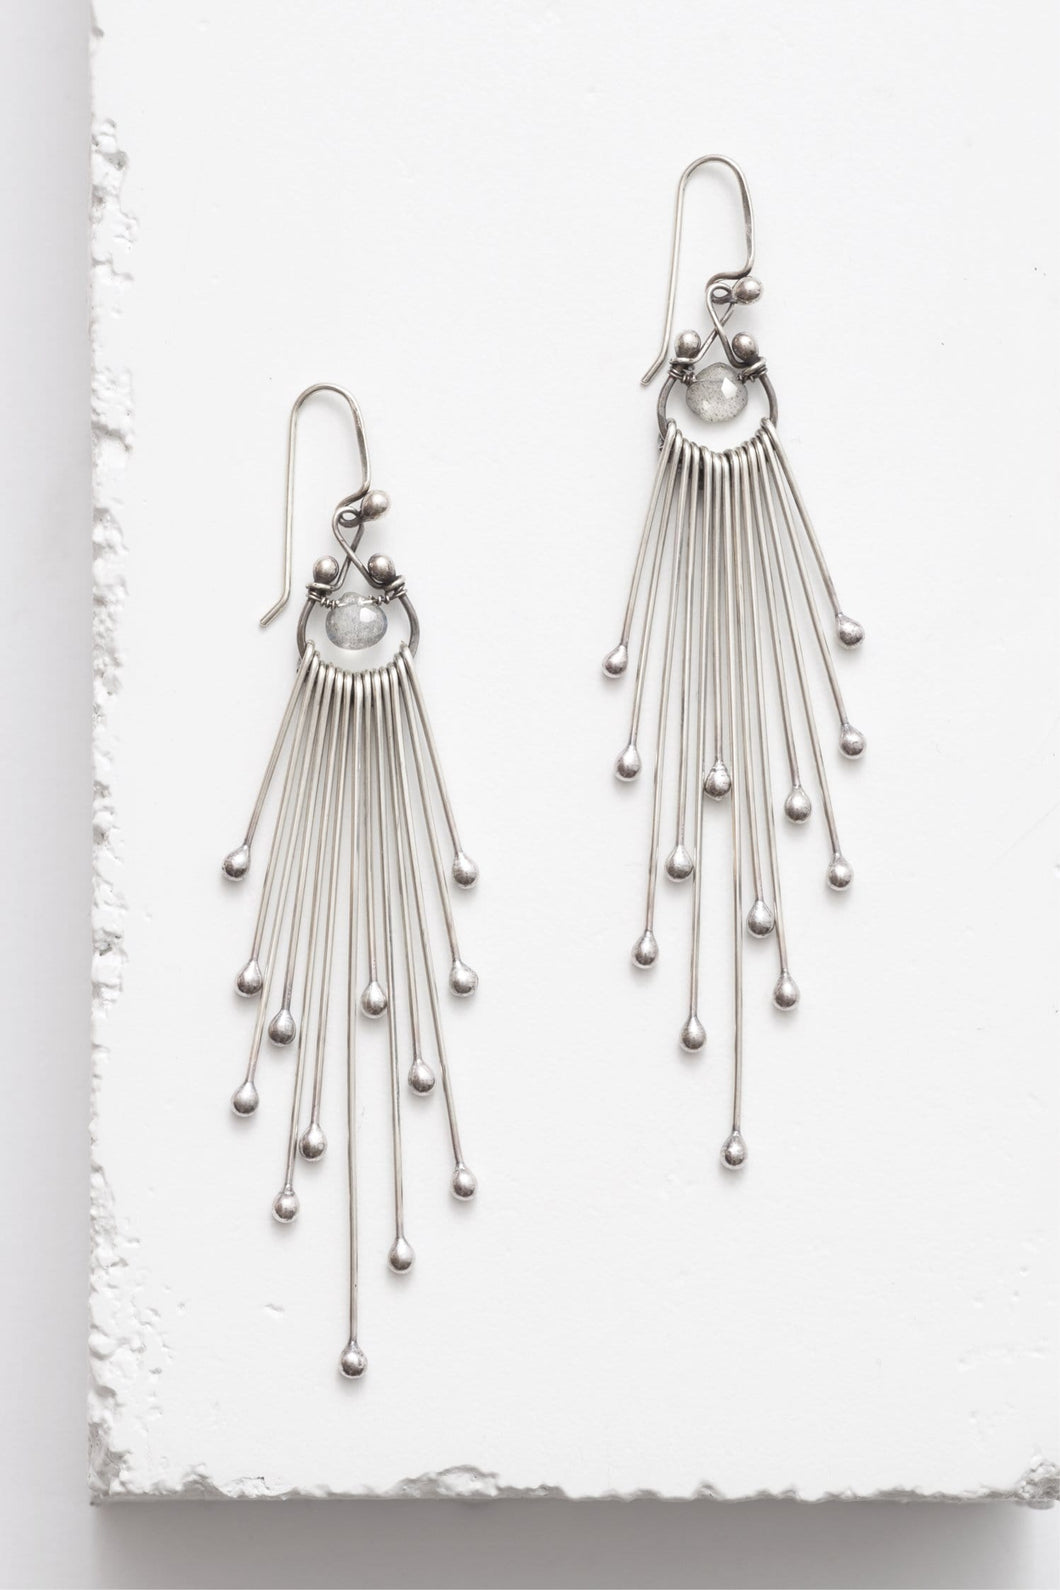 Martchsticks Earrings - The Highlight Gallery